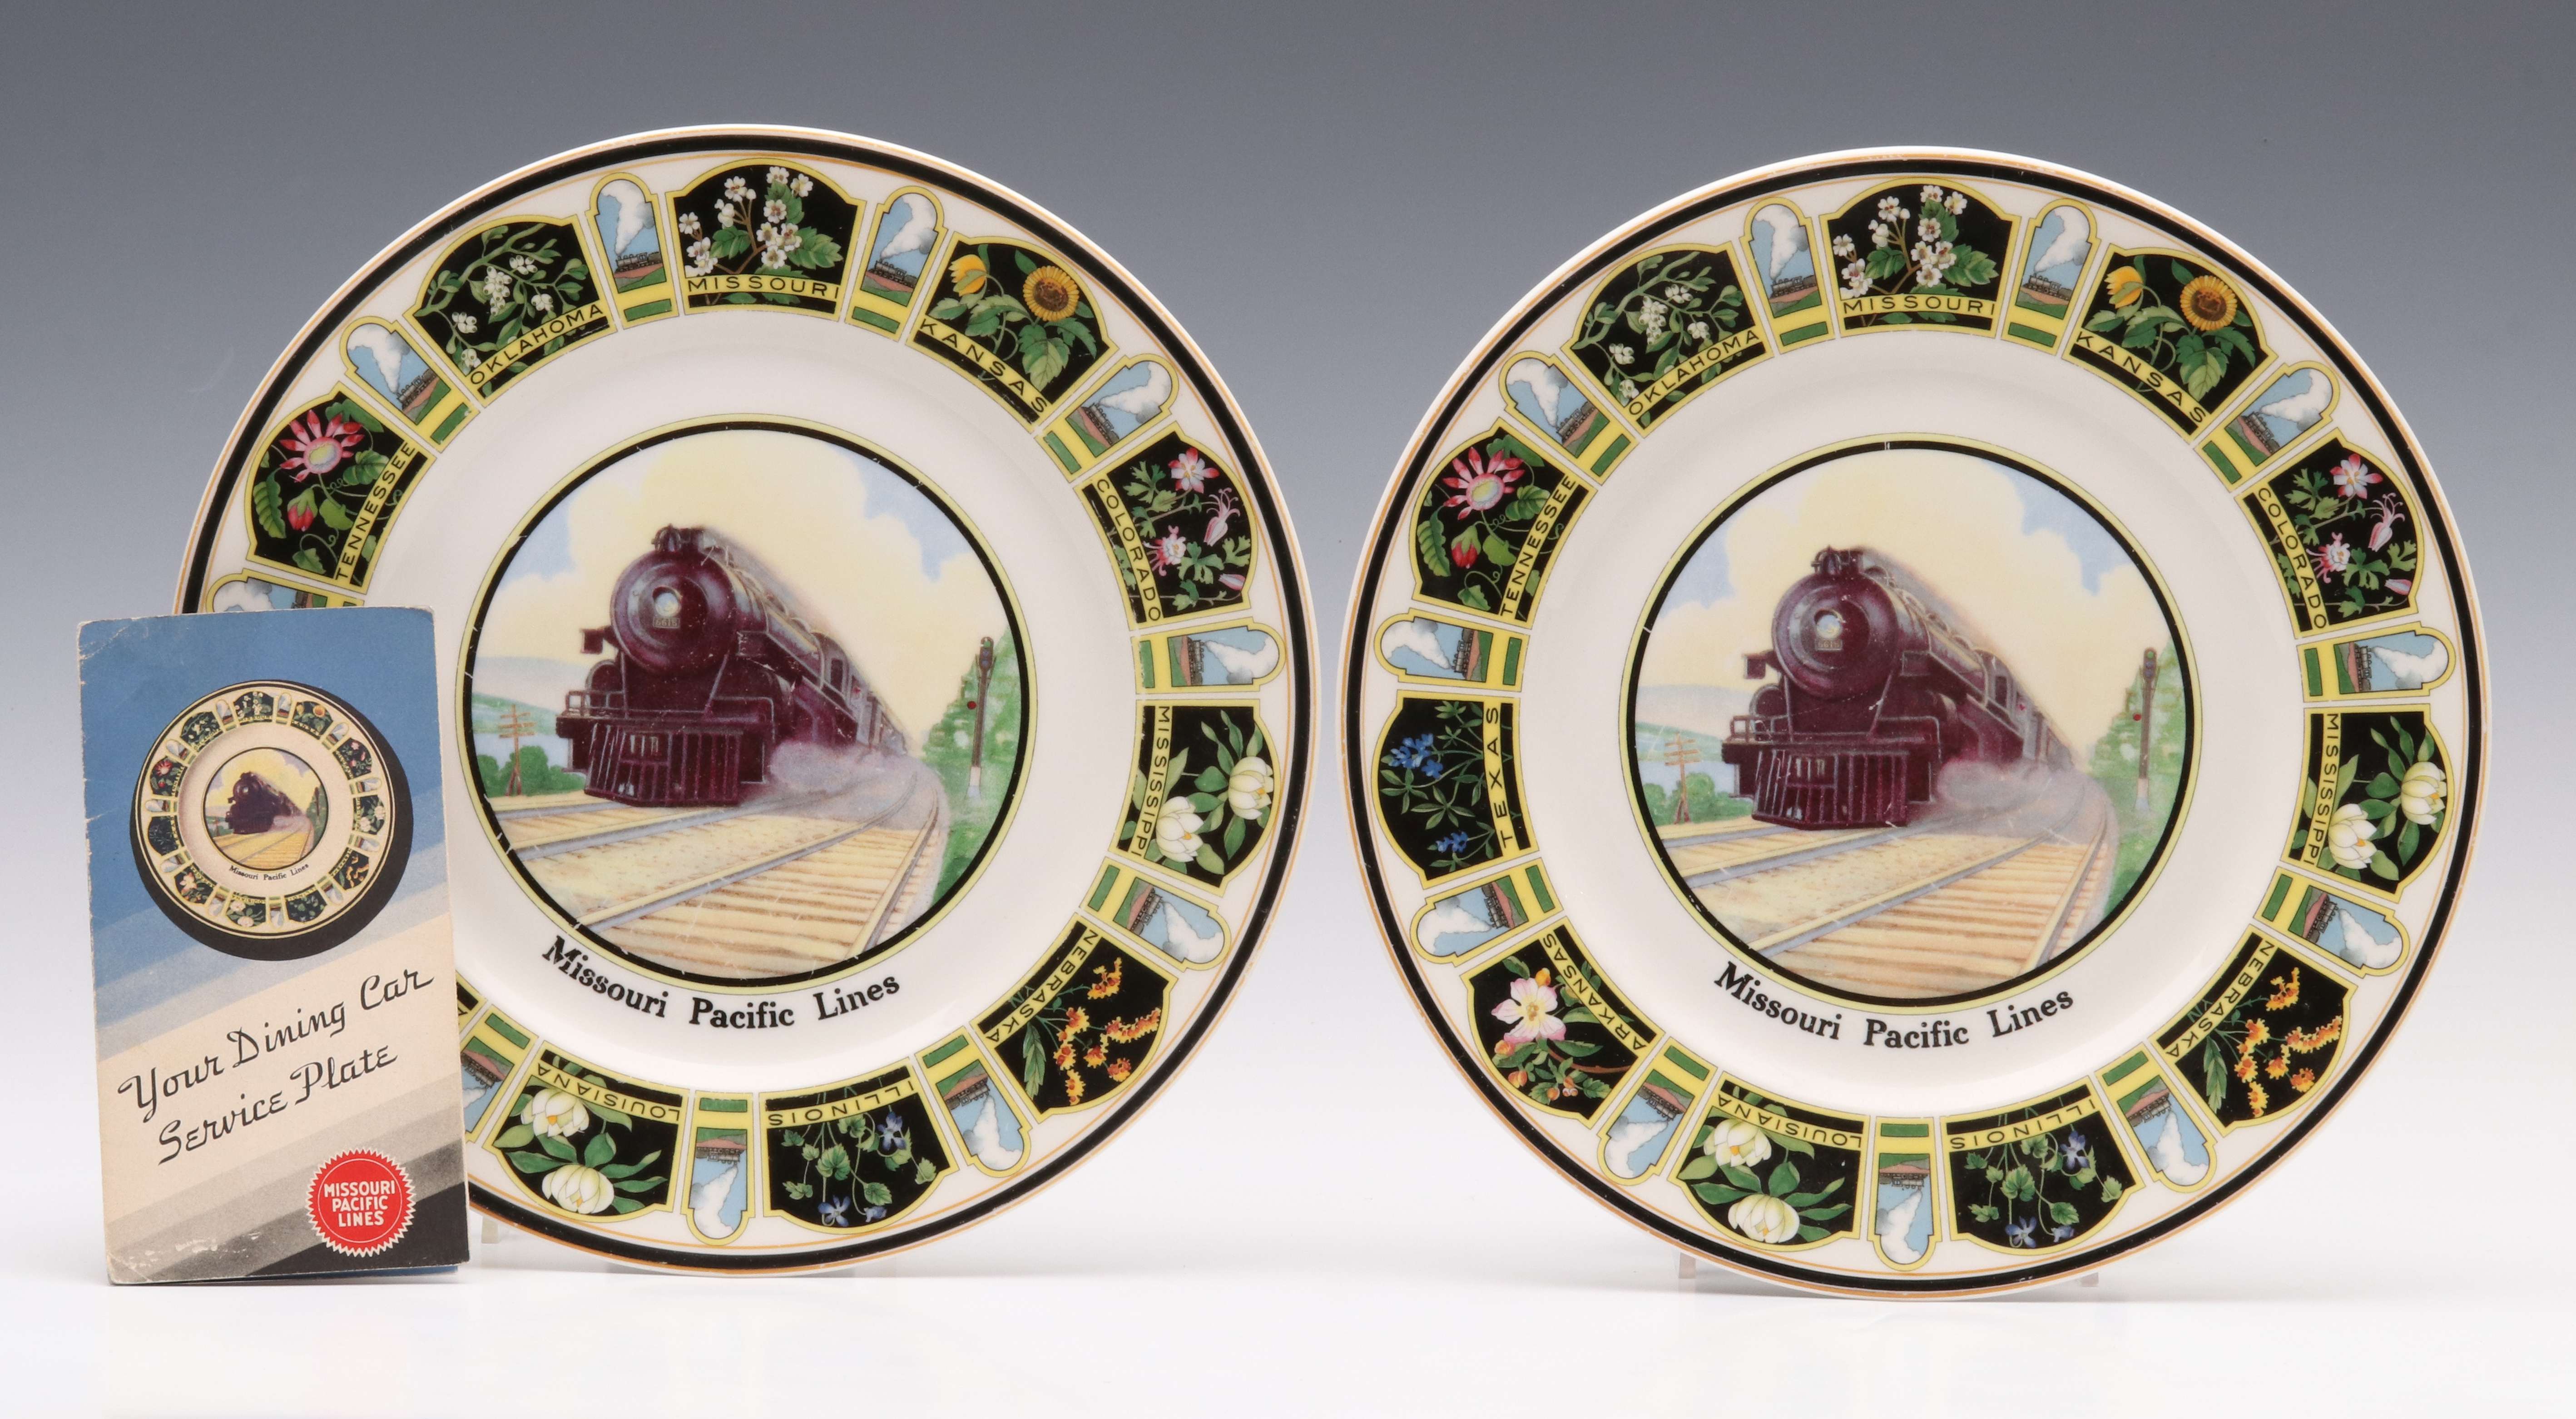 MISSOURI PACIFIC LINES STATE FLOWERS SERVICE PLATES